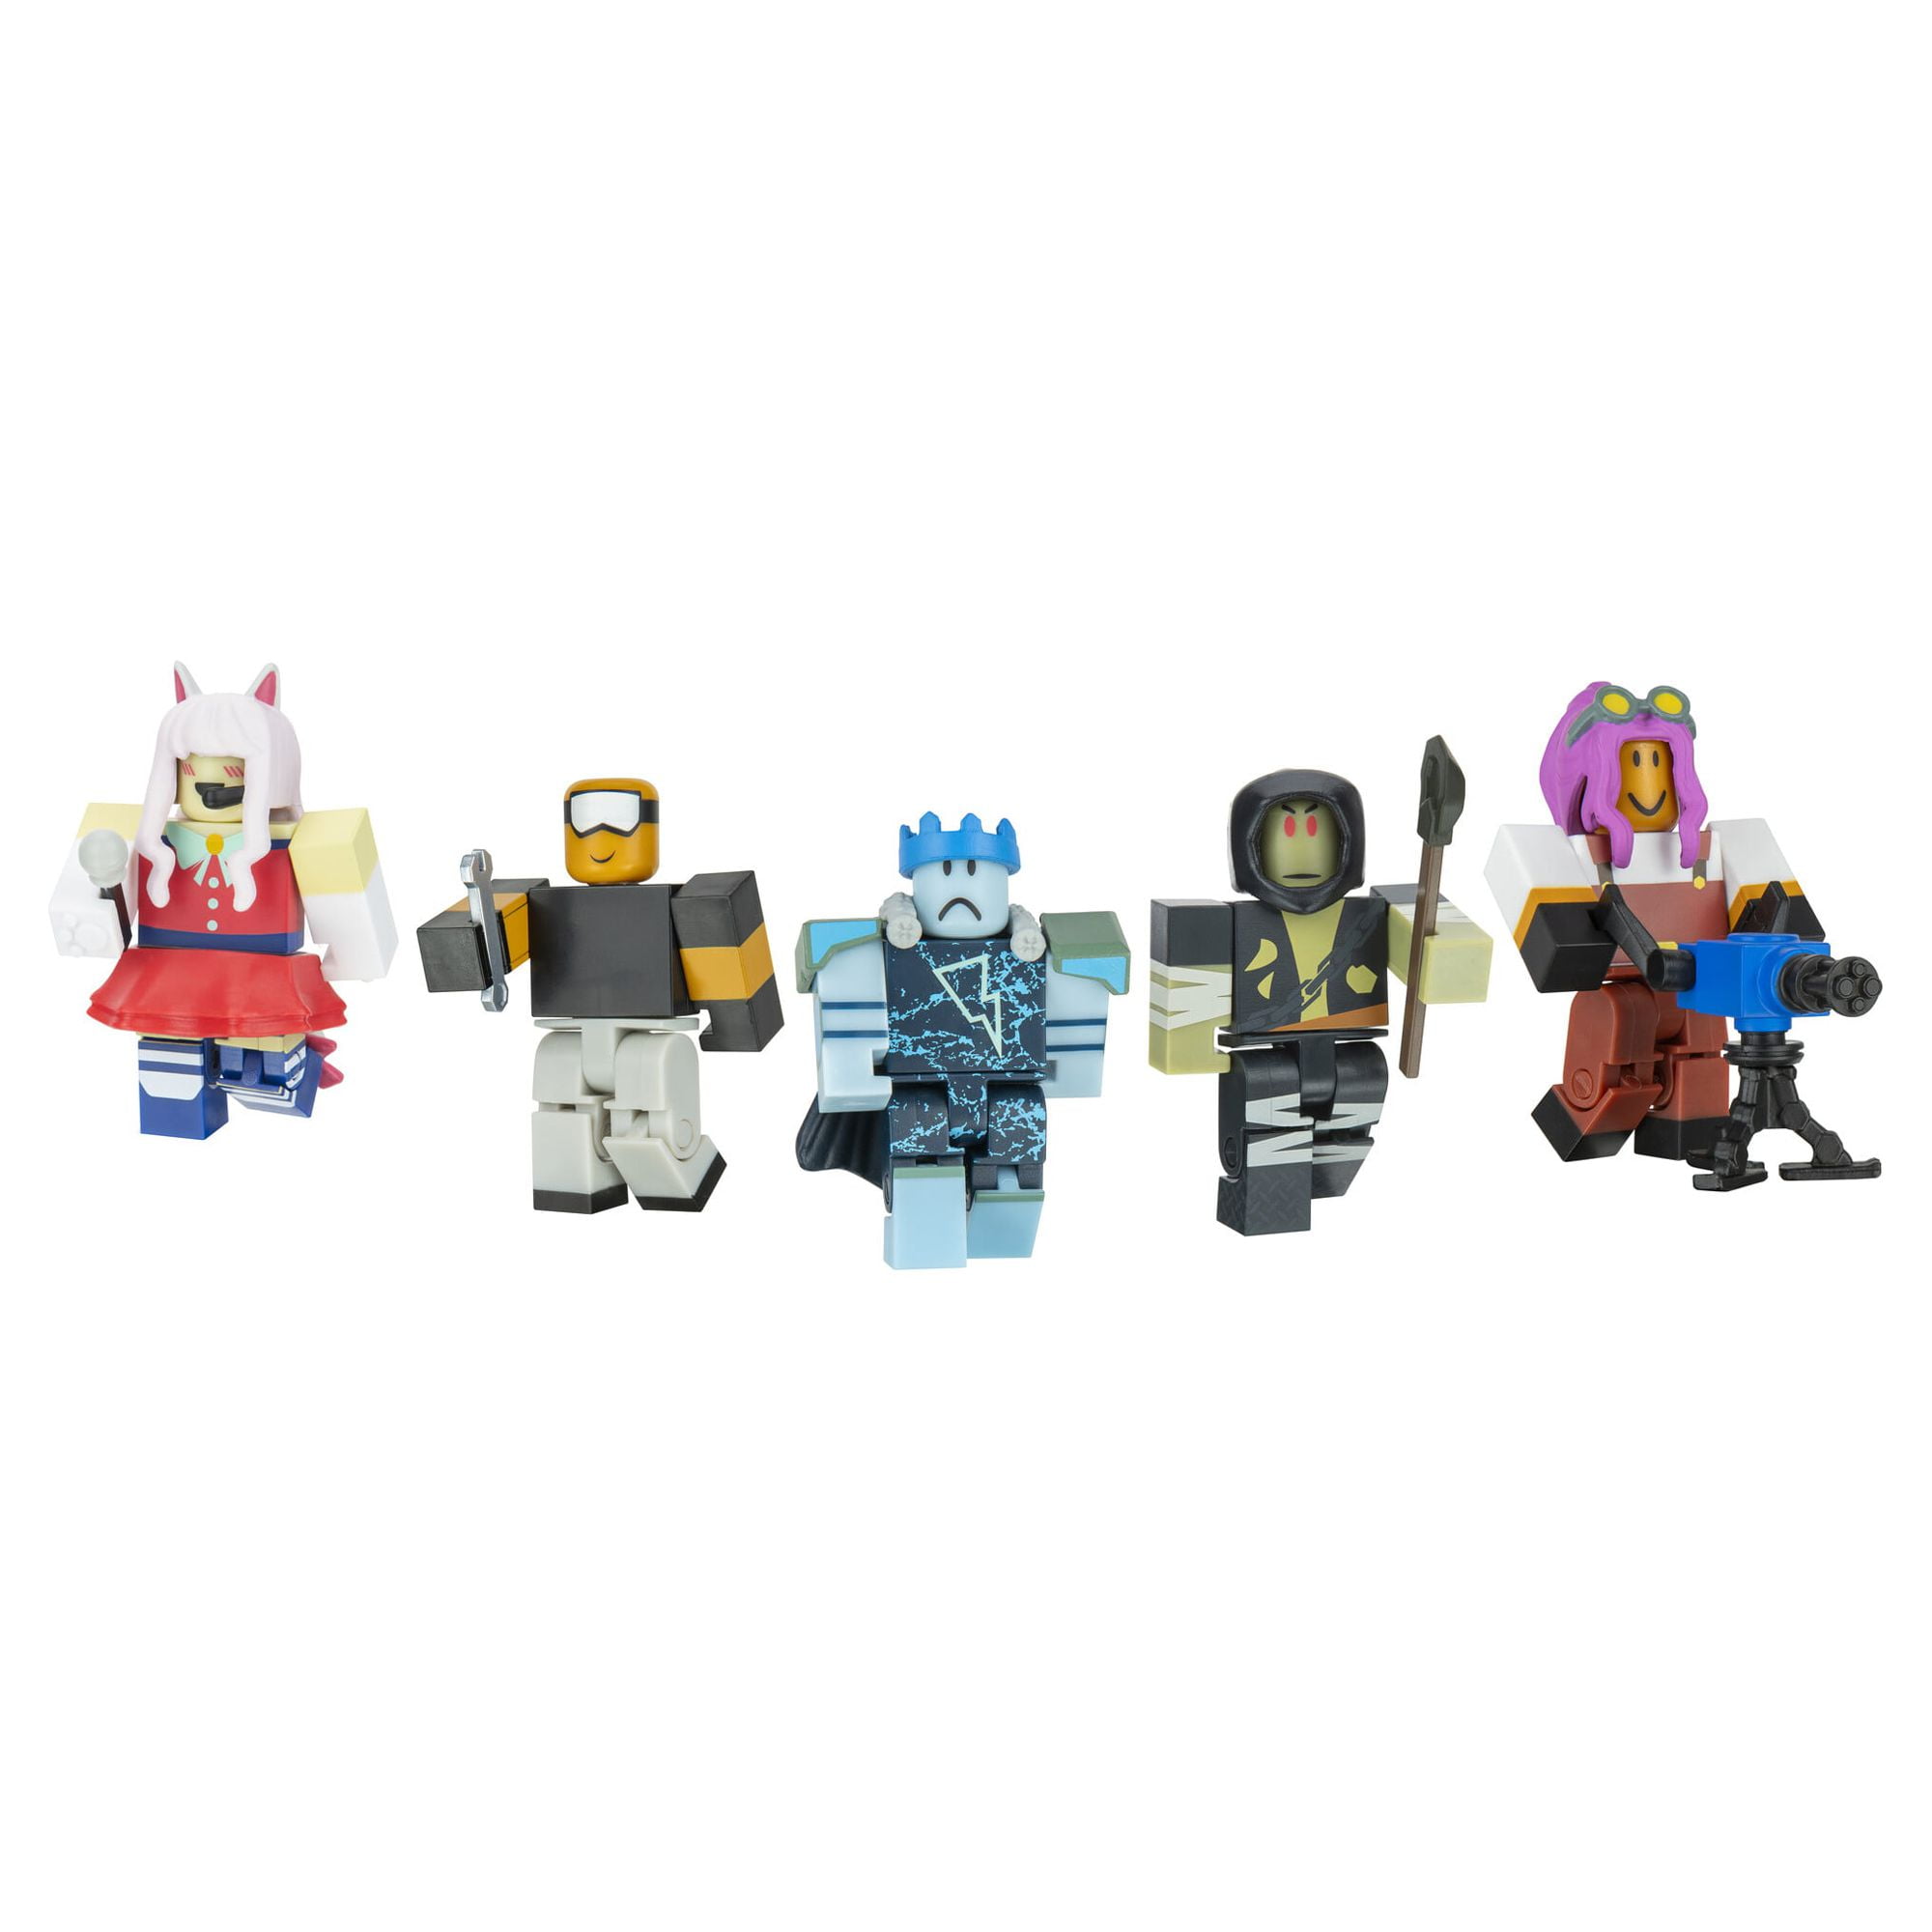  Roblox Action Collection - Tower Defense Simulator: Last Stand  Playset [Includes Exclusive Virtual Item] : Toys & Games